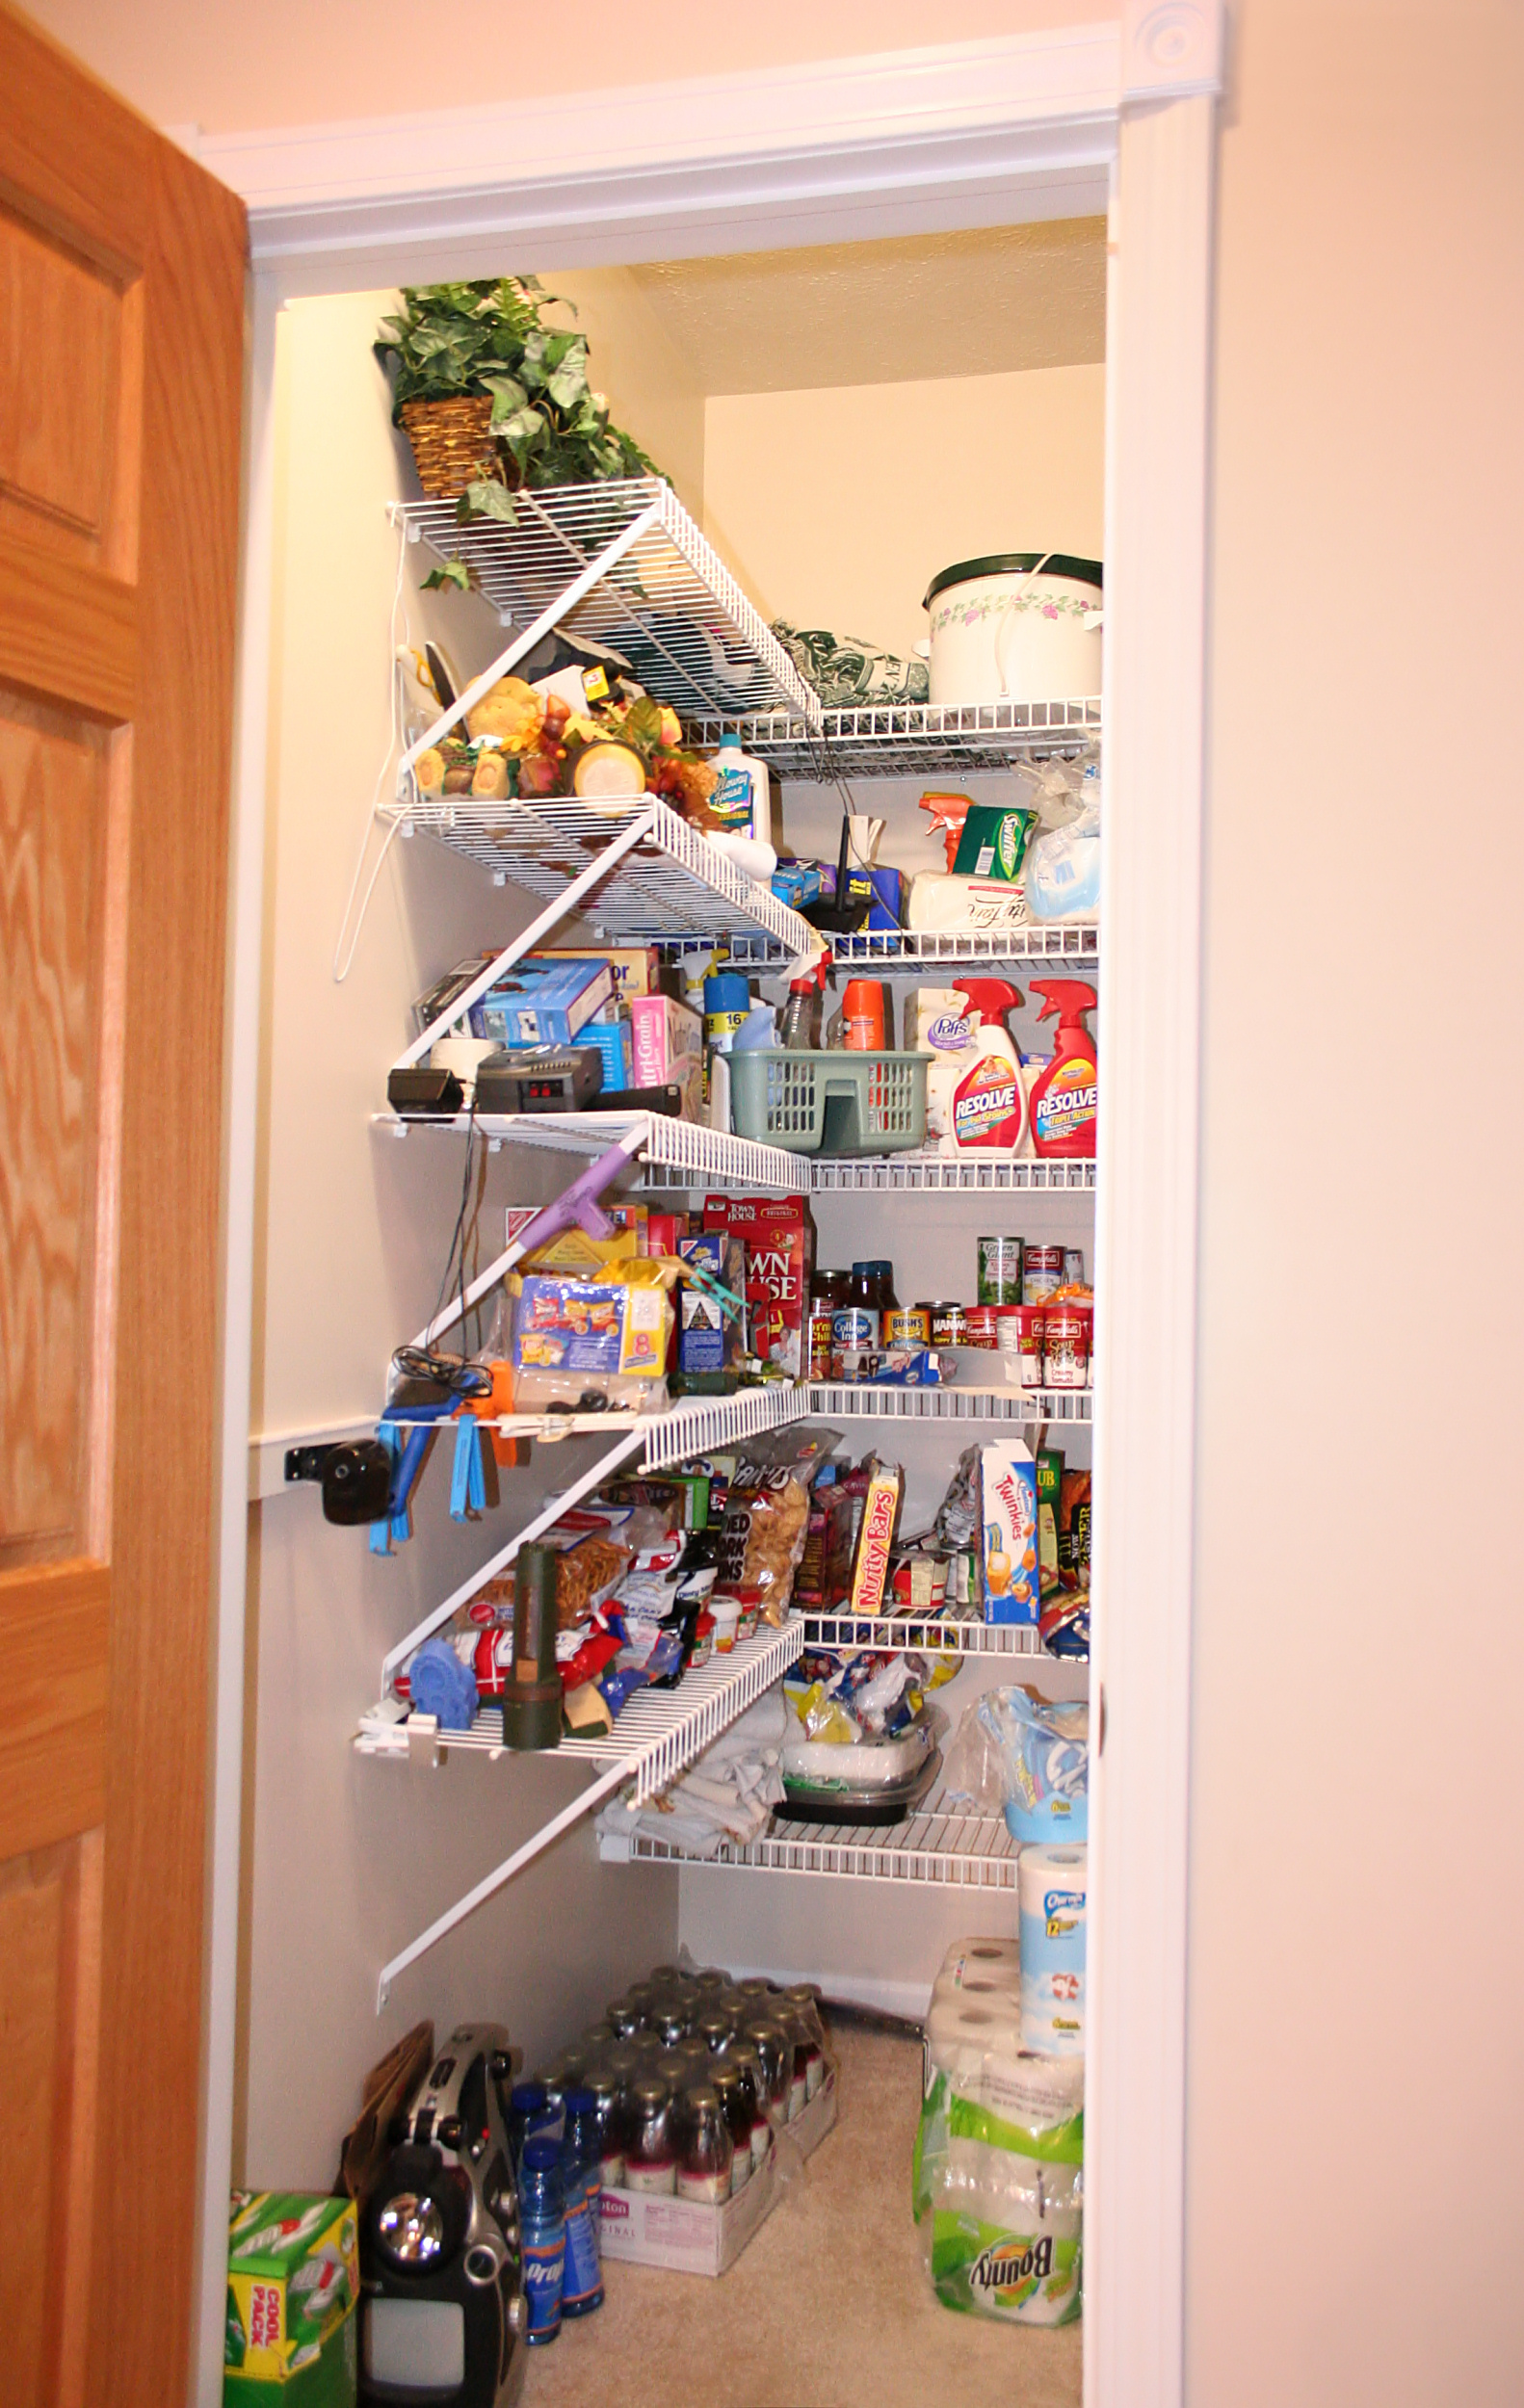 How to Inexpensively Organize Your Pantry